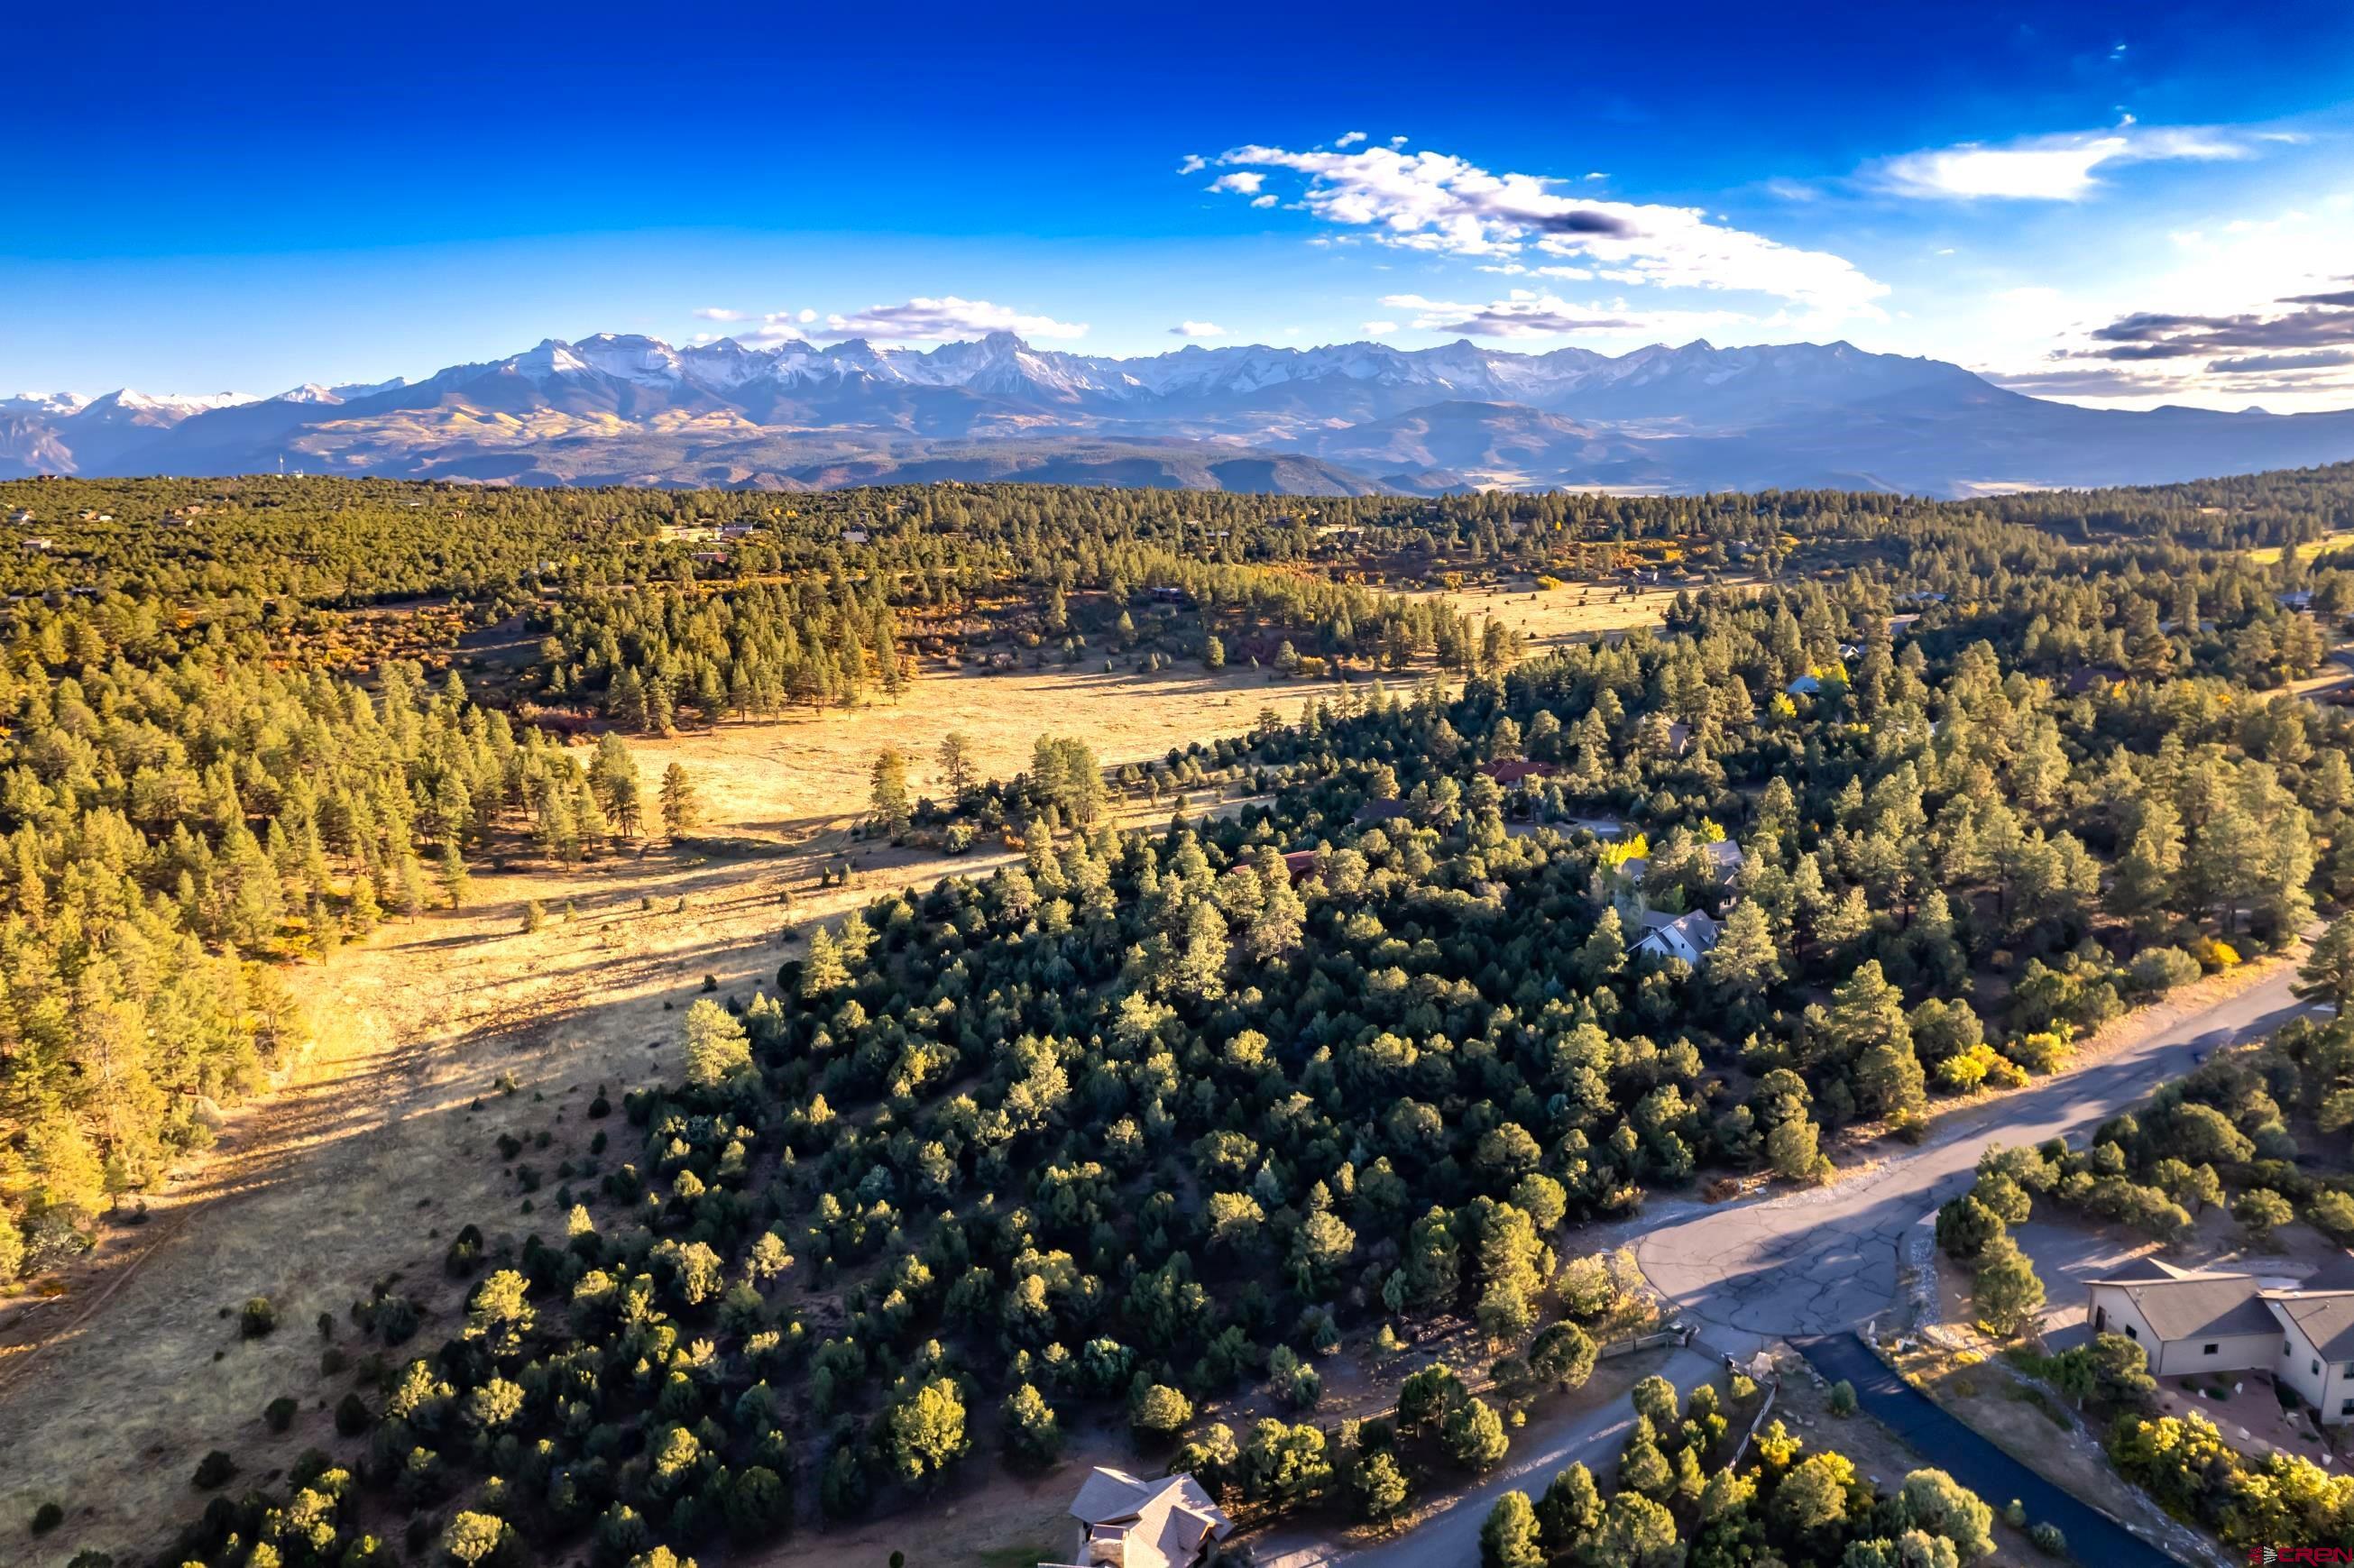 Spectacular .98 Acre Lot with Mountain Views and Serene Surroundings.  Discover the epitome of mountain living on this expansive lot, boasting awe-inspiring views of the majestic mountains and enveloped by a tranquil setting of towering, mature Ponderosa pines ensuring your privacy and serenity.  Situated just a short 12-minute drive from Ridgway, 25 minutes from Montrose, and a mere 55 minutes from the enchanting town of Telluride, this location offers the perfect blend of convenience and seclusion. The possibilities are endless with an excellent build site, providing you with numerous options to craft a home tailored to your desired floor plan and lifestyle.  For golf enthusiasts, this parcel is conveniently located less than a mile from Divide Ranch, promising easy access to pristine golfing experiences. All roads leading to Ridgway, Montrose and Telluride are paved, and for the adventurous spirits, optional gravel roads present enticing shortcuts. Immerse yourself in the picturesque views of the San Juans and Cimarrons, embracing the elevated vantage point this property affords.  Opportunities like this are rare, with only a few lots left boasting such remarkable features. Don't miss your chance to build the mountain retreat of your dreams in this truly remarkable location.  This lot is gently sloping to the east and borders approximately 18 acres of Loghill Village open space. Buyer to pay the $3000 golf and country club membership transfer fee. There is approximately a $1800 +/- membership fee due annually. Power, water, and natural gas are to the property line. This lot is a must see!!